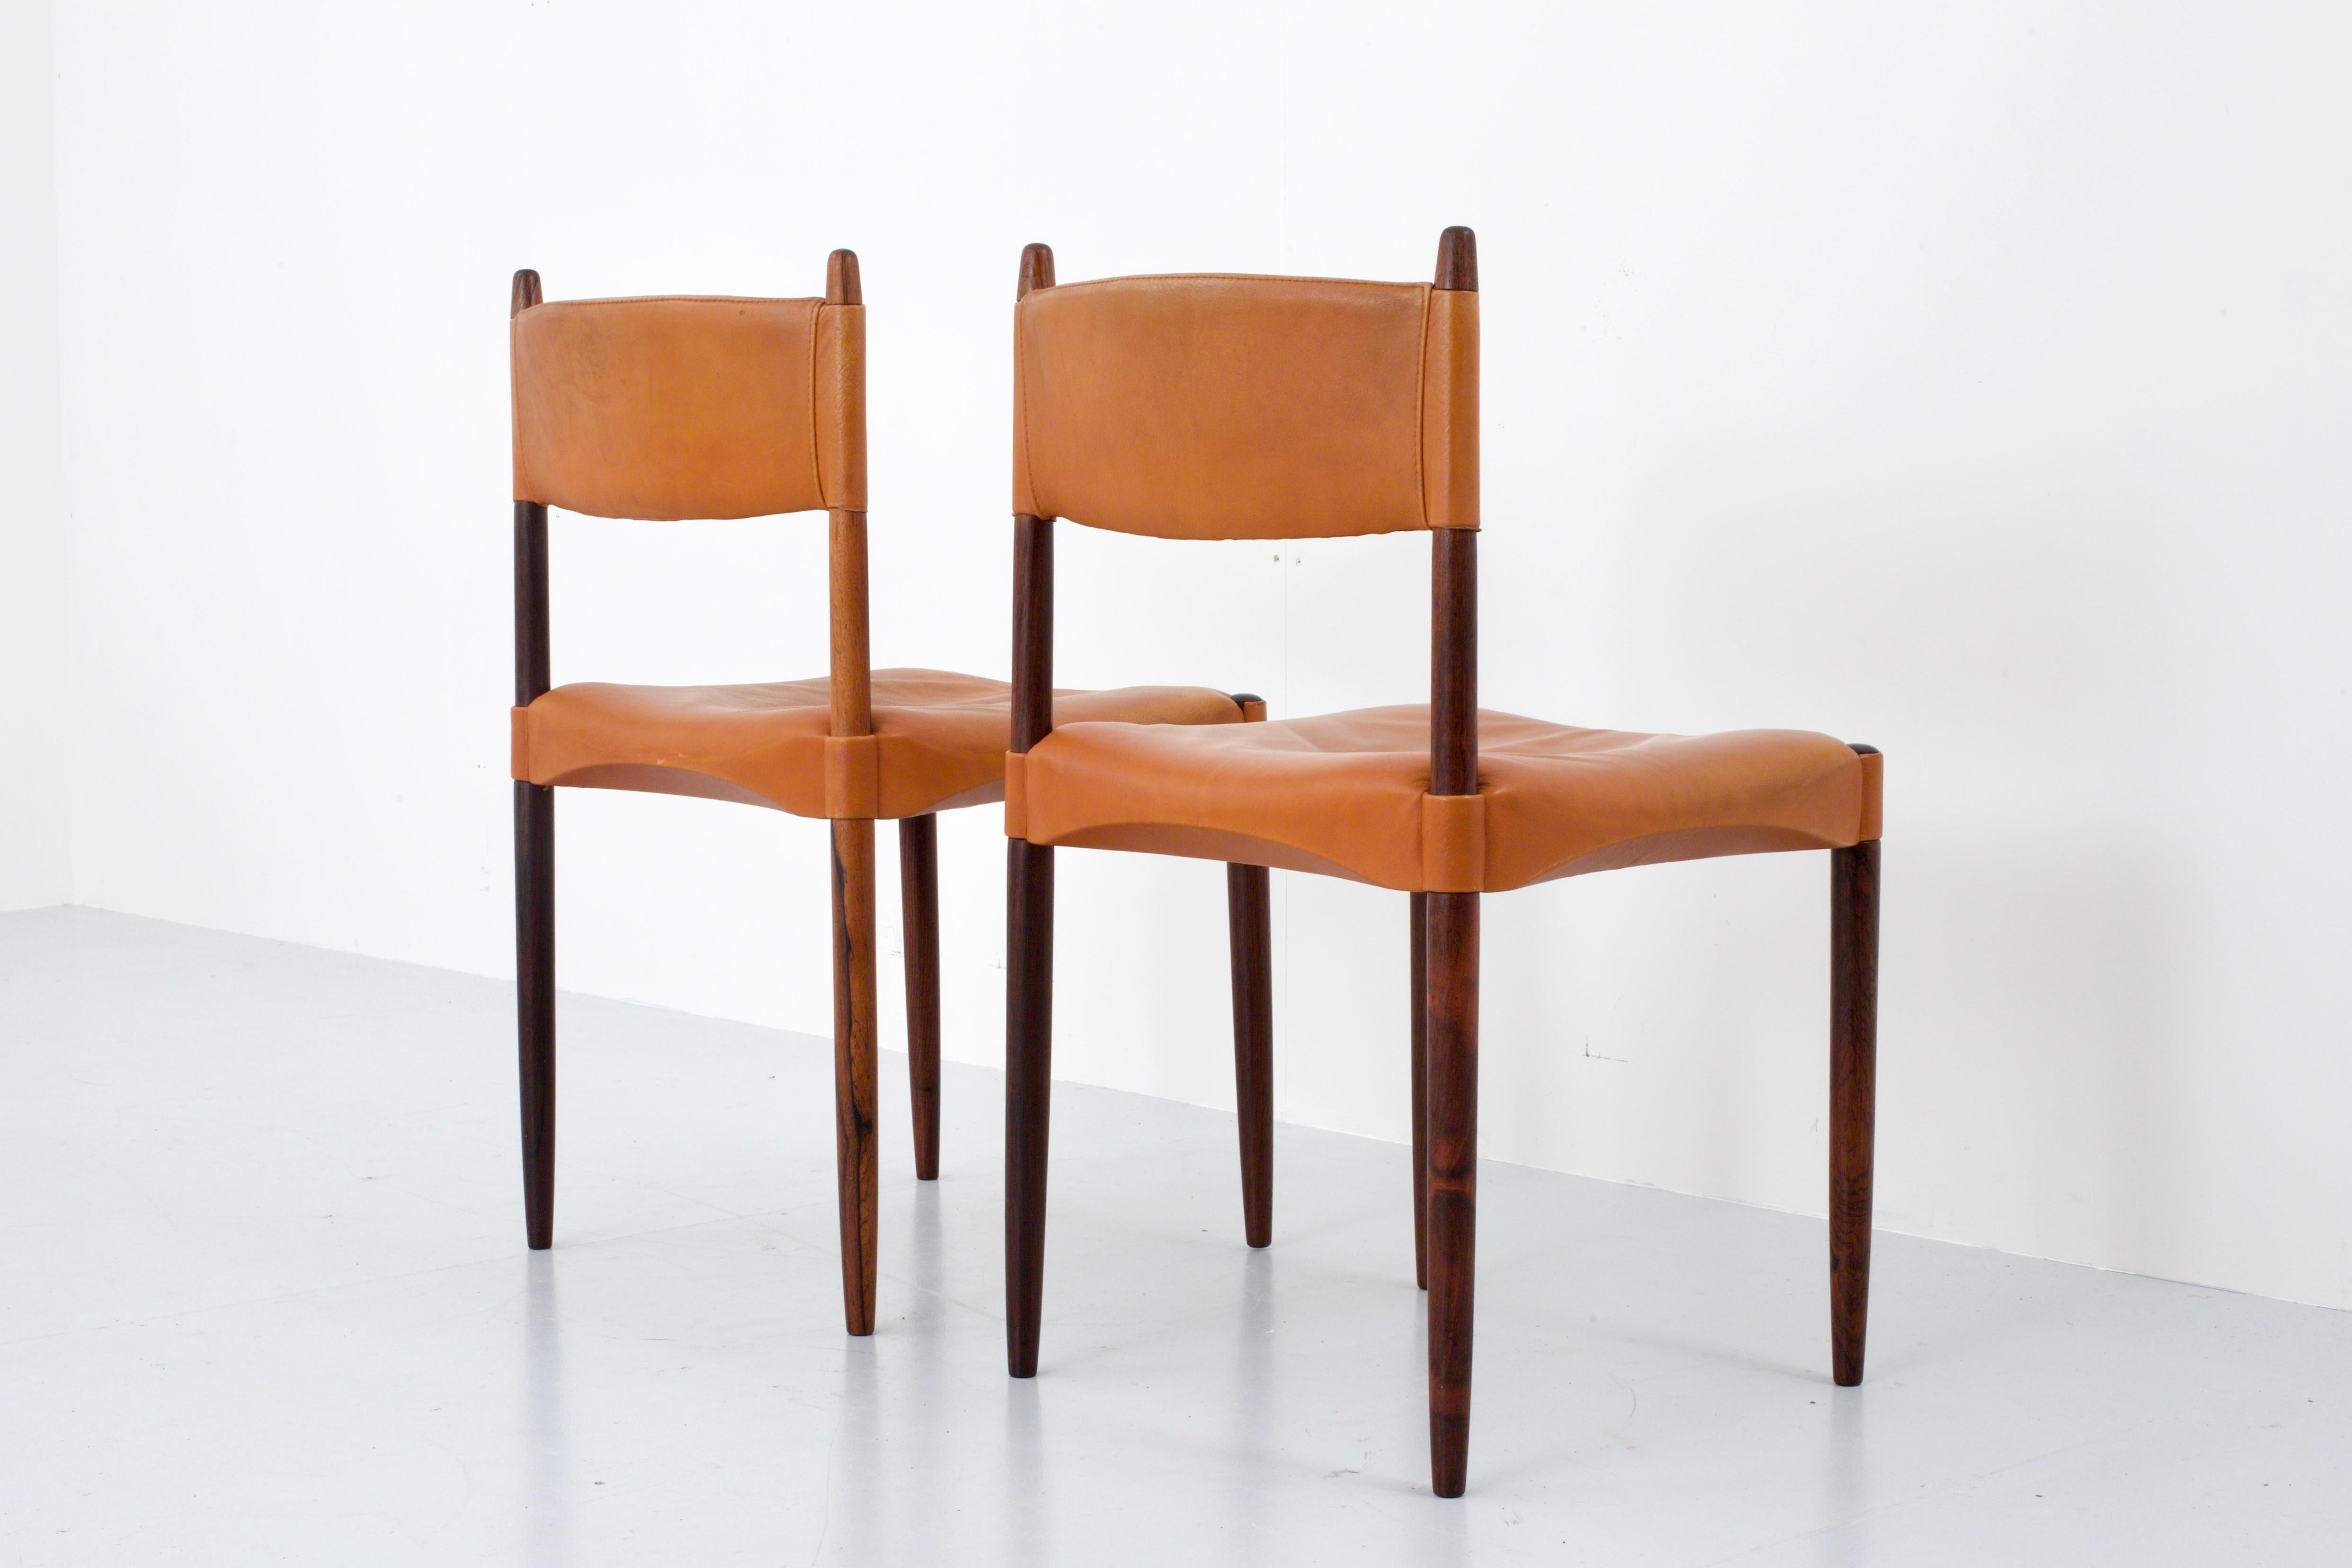 Set of 6 Dining Chairs by Anders Jensen in Rosewood and Leather, Denmark, 1960's For Sale 5